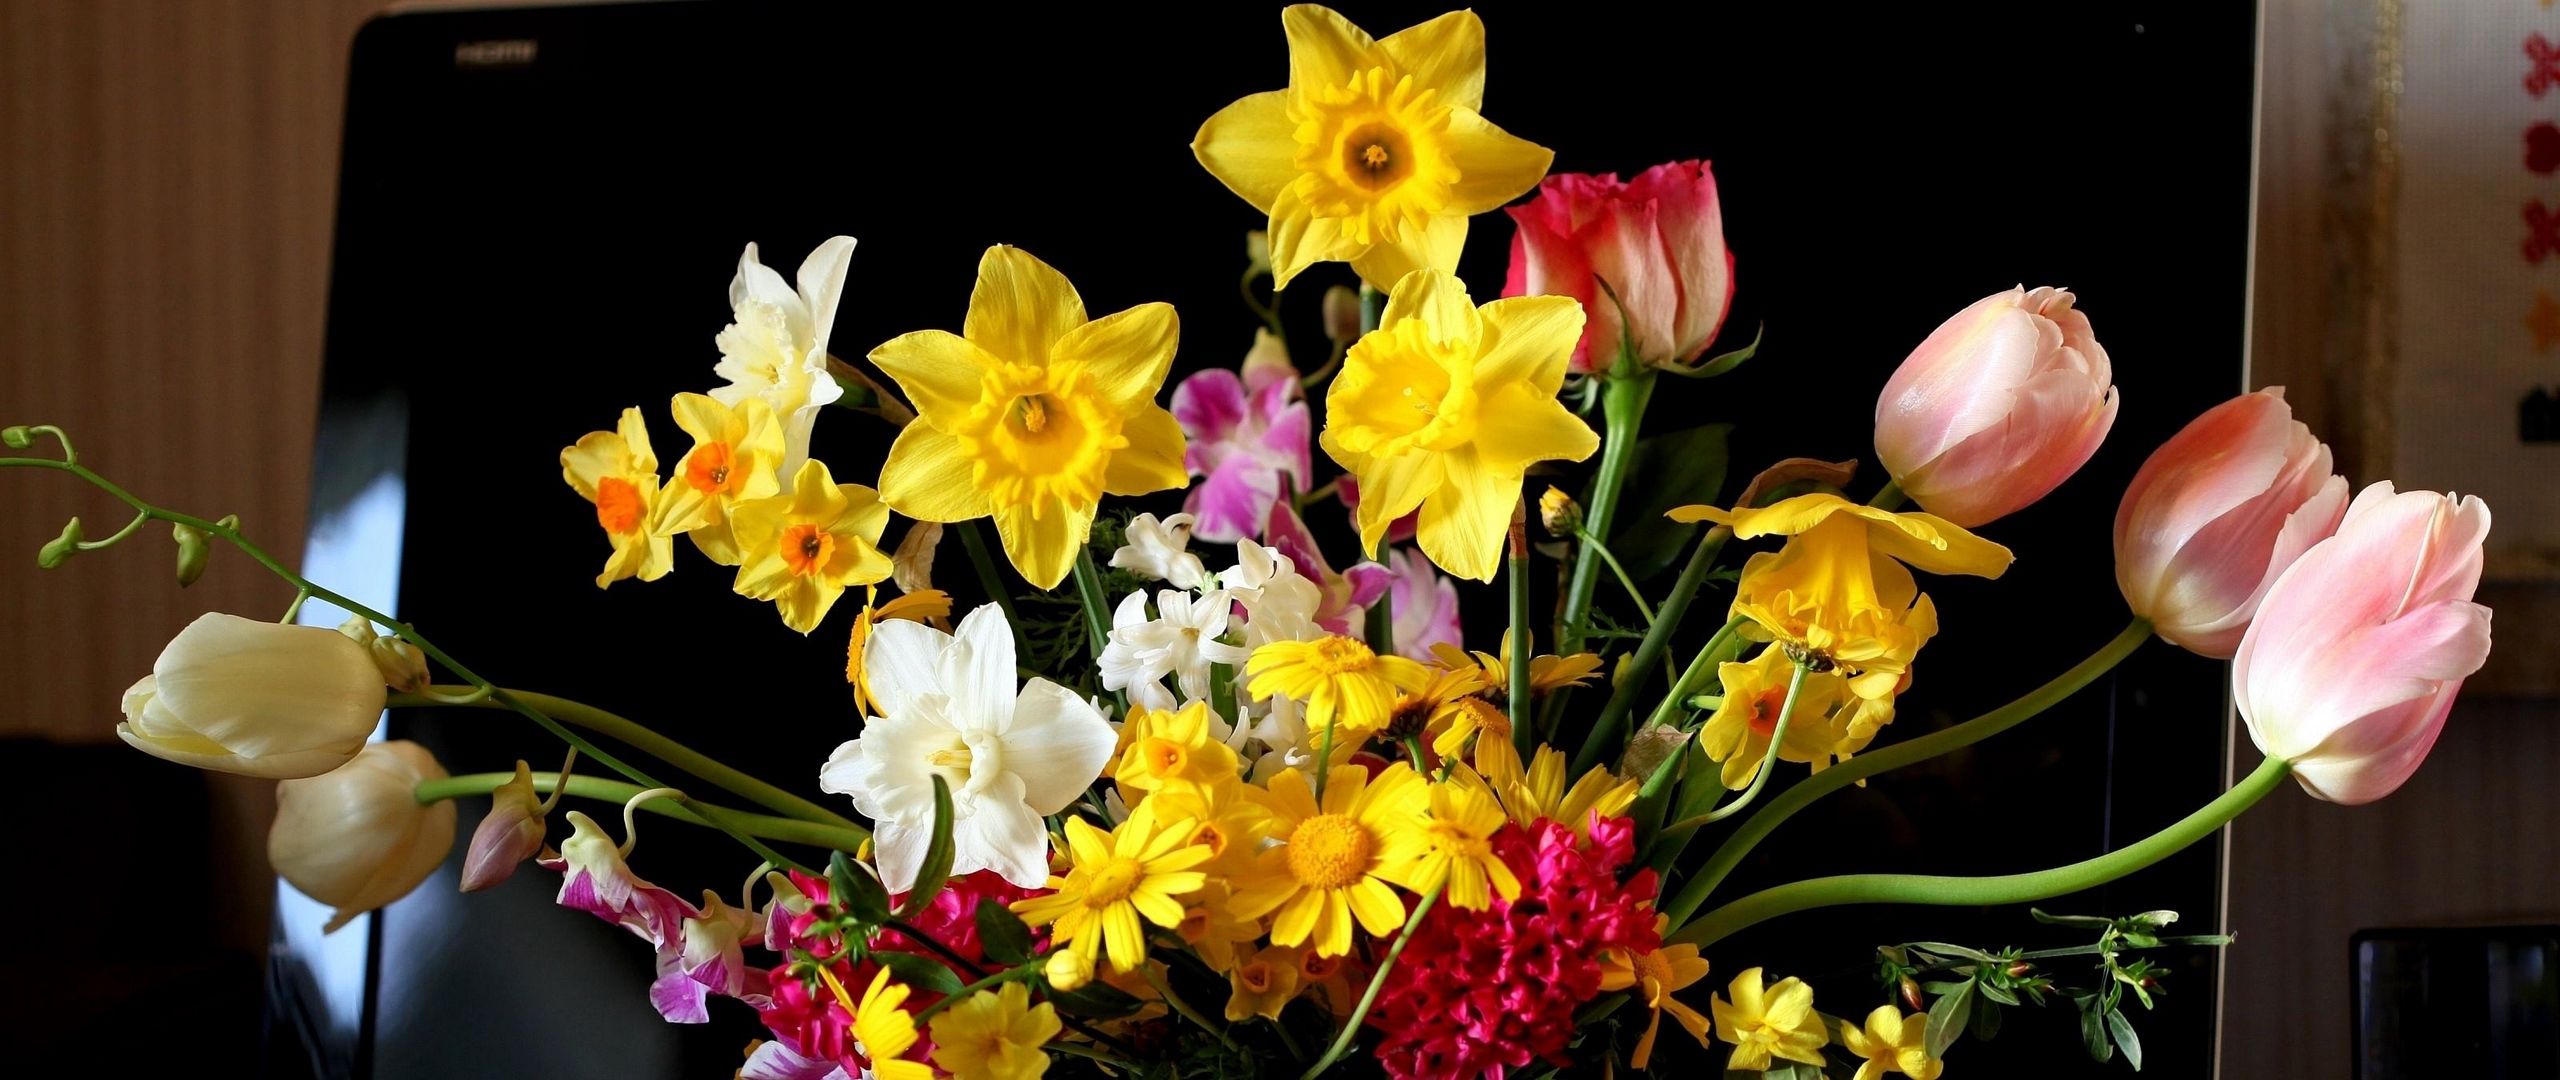 Download wallpaper 2560x1080 tulips, daffodils, hyacinths, flowers